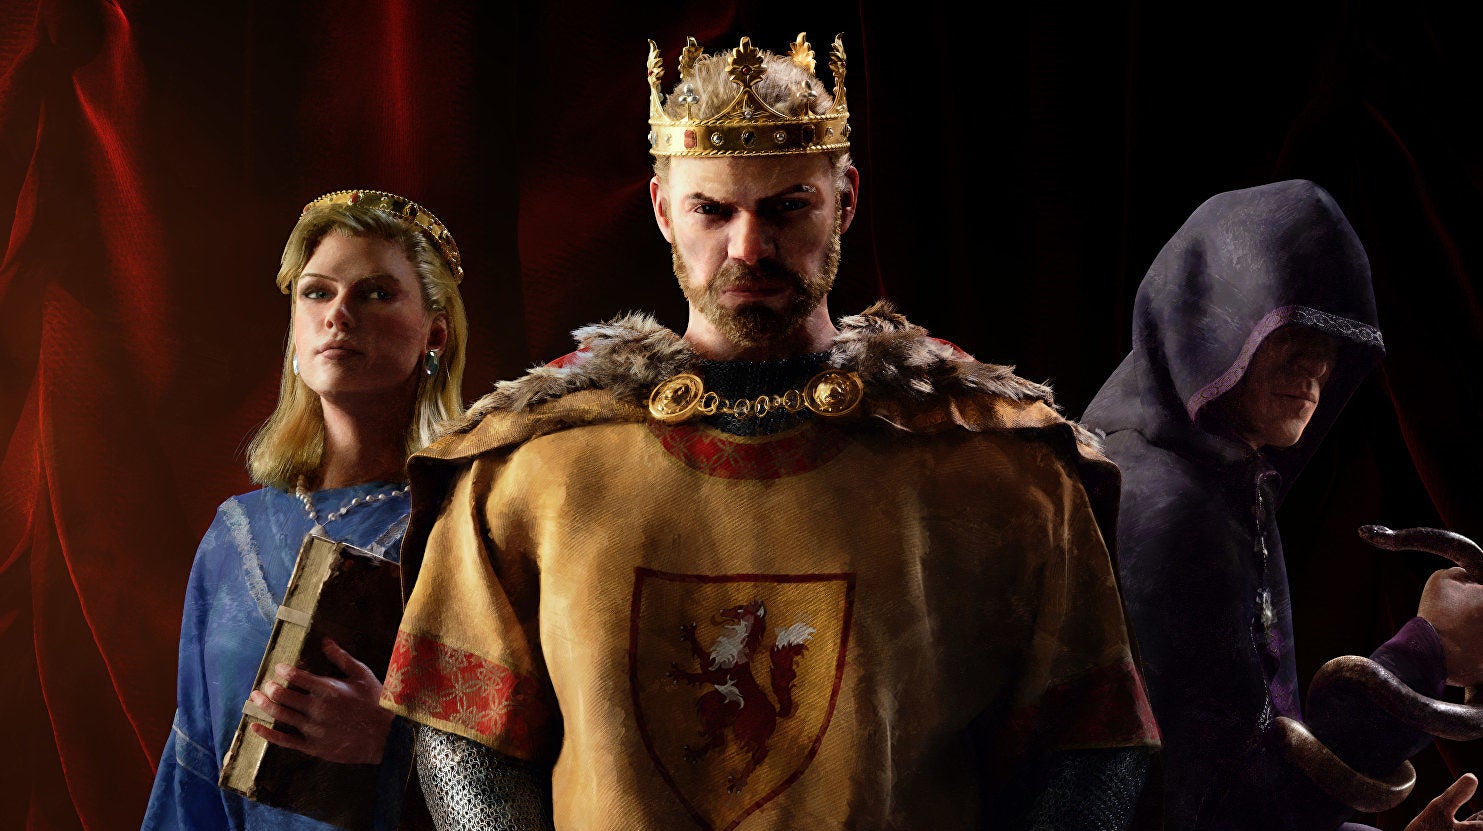 Image for Crusader Kings 3 coming to PS5, Xbox Series X/S in March